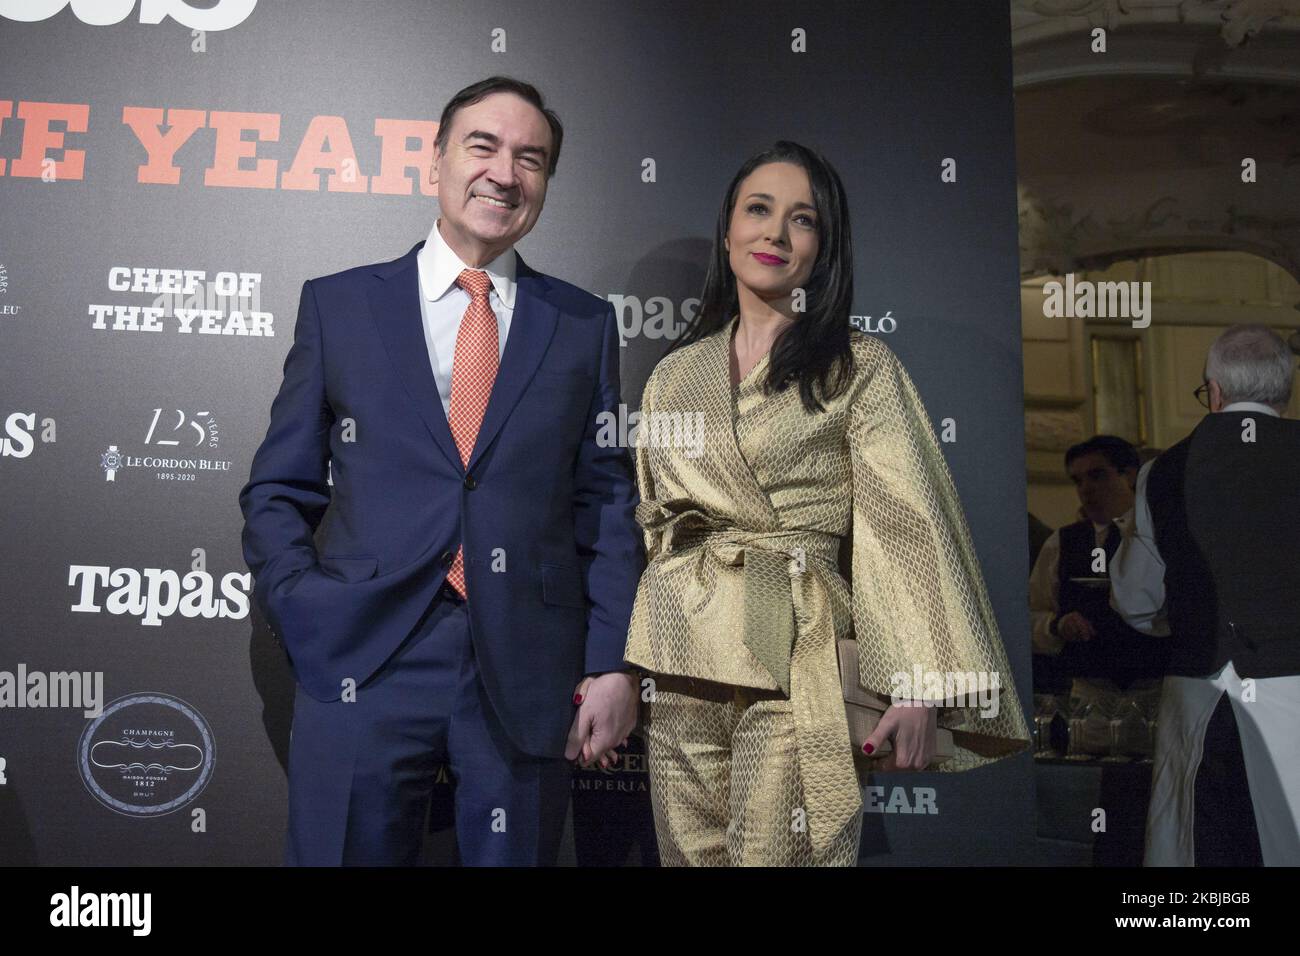 Pedro J. Ramirez and Cruz Sanchez de Lara attend the delivery of the Chef of the year 2019 award in Madrid. March 2, 2020 Spain. (Photo by Oscar Gonzalez/NurPhoto) Stock Photo